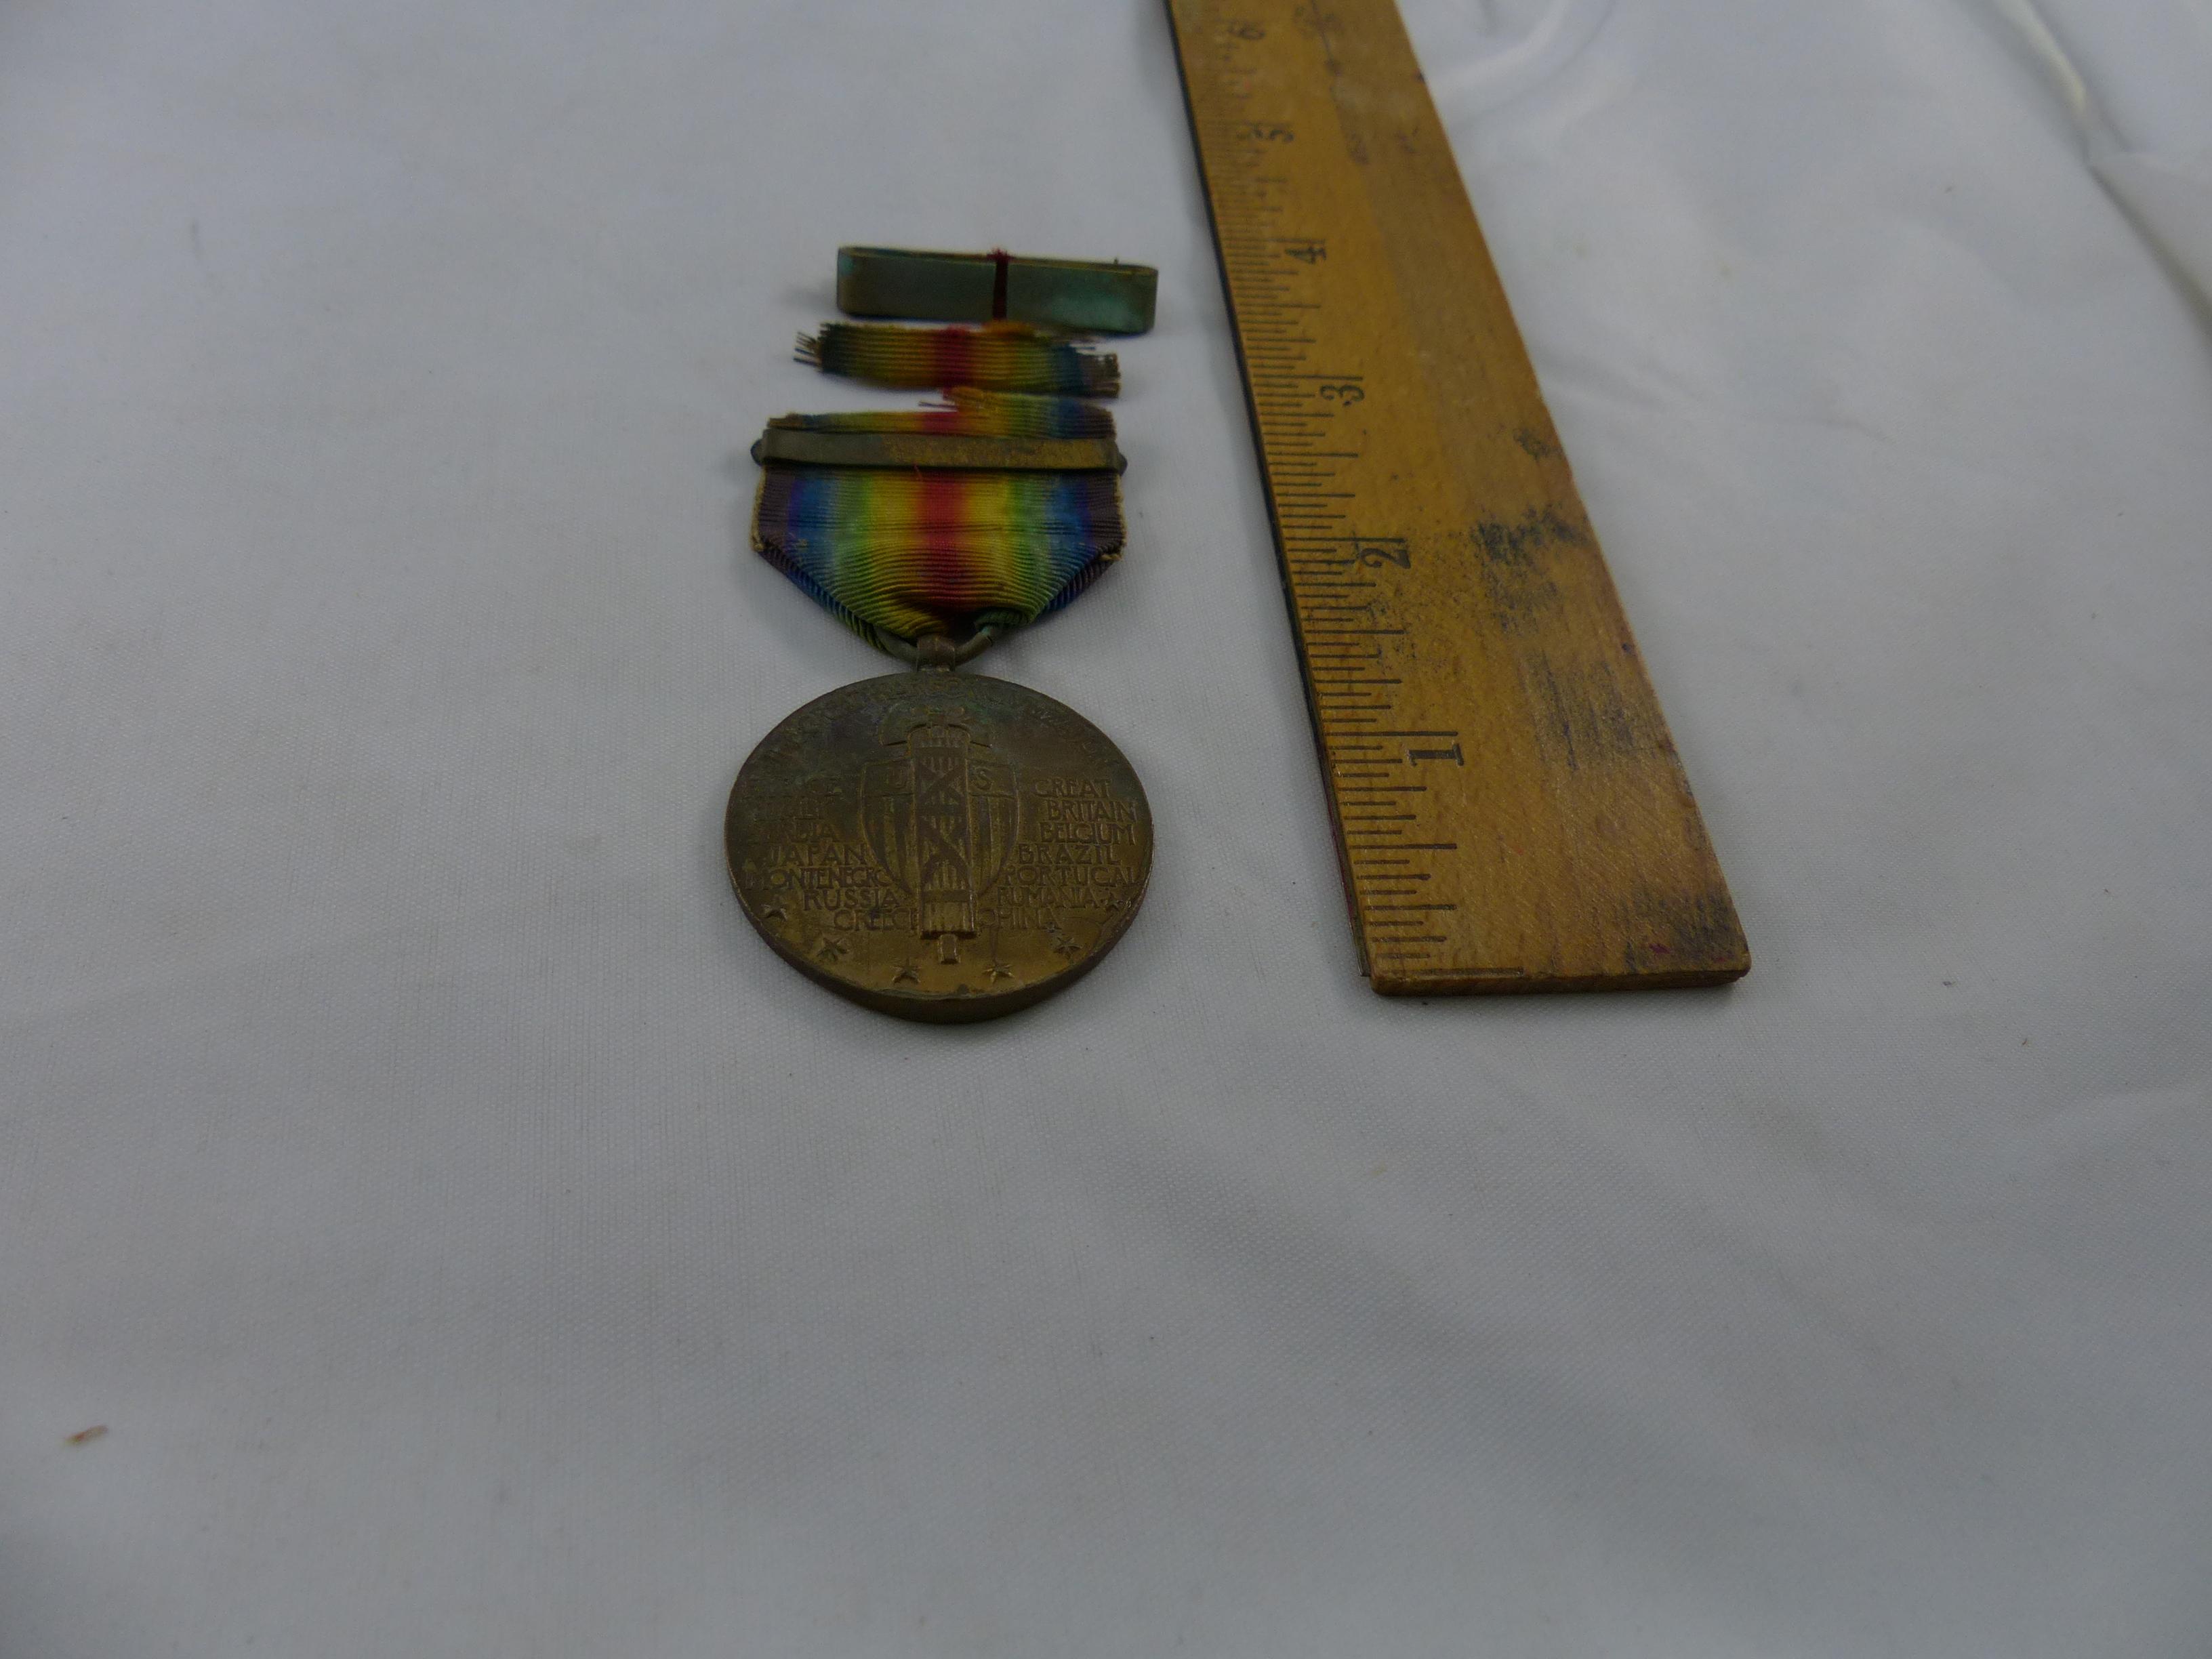 Vintage Antique Pins and Medals